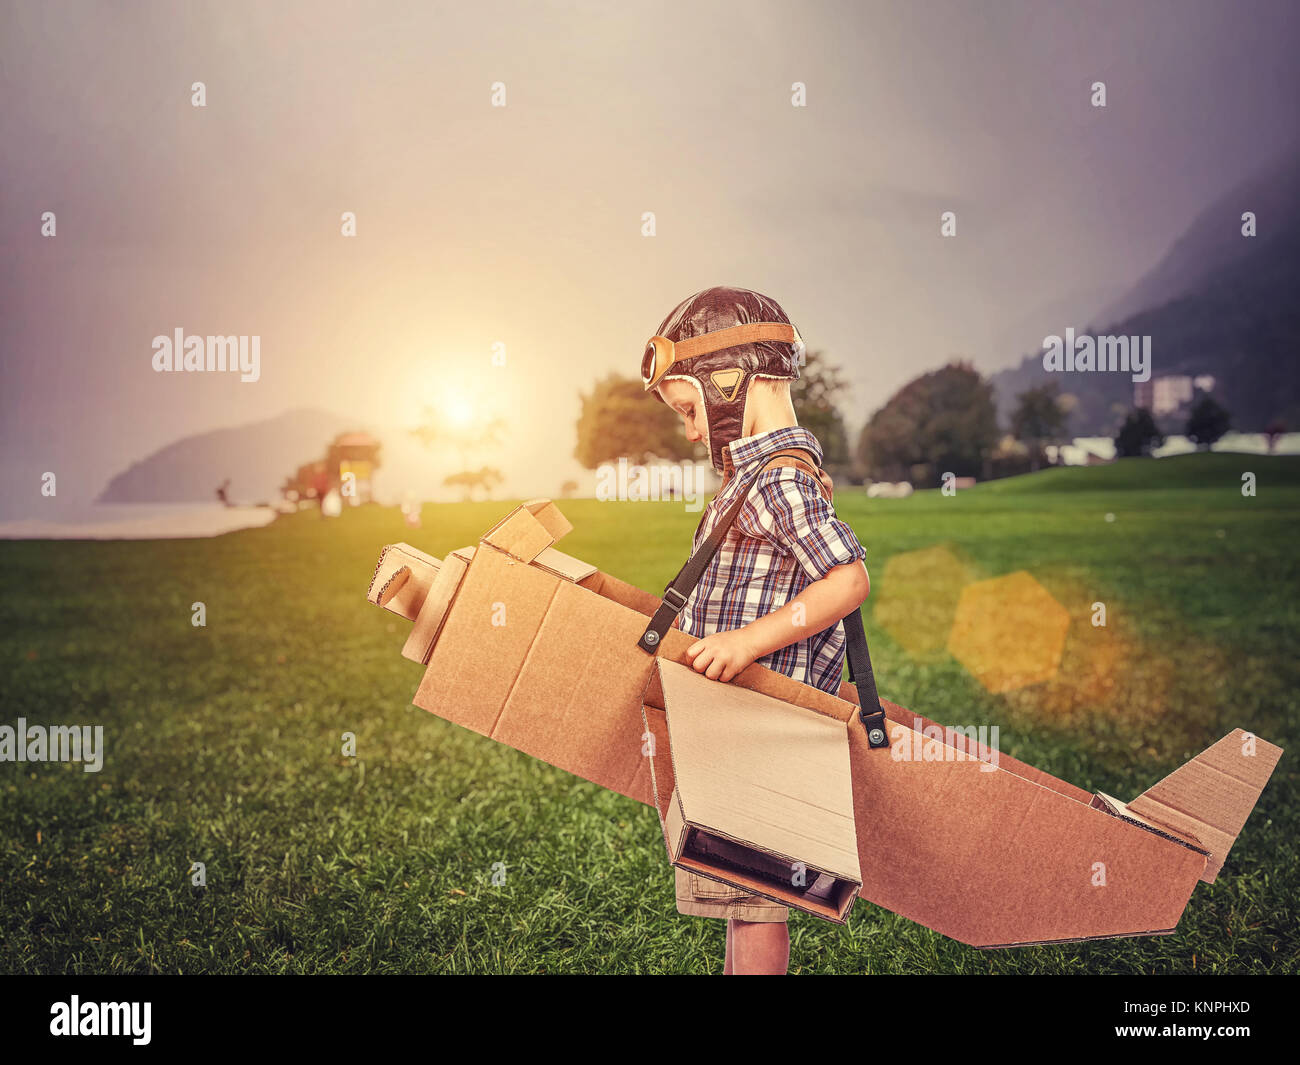 little kid play with cardboard airplane Stock Photo